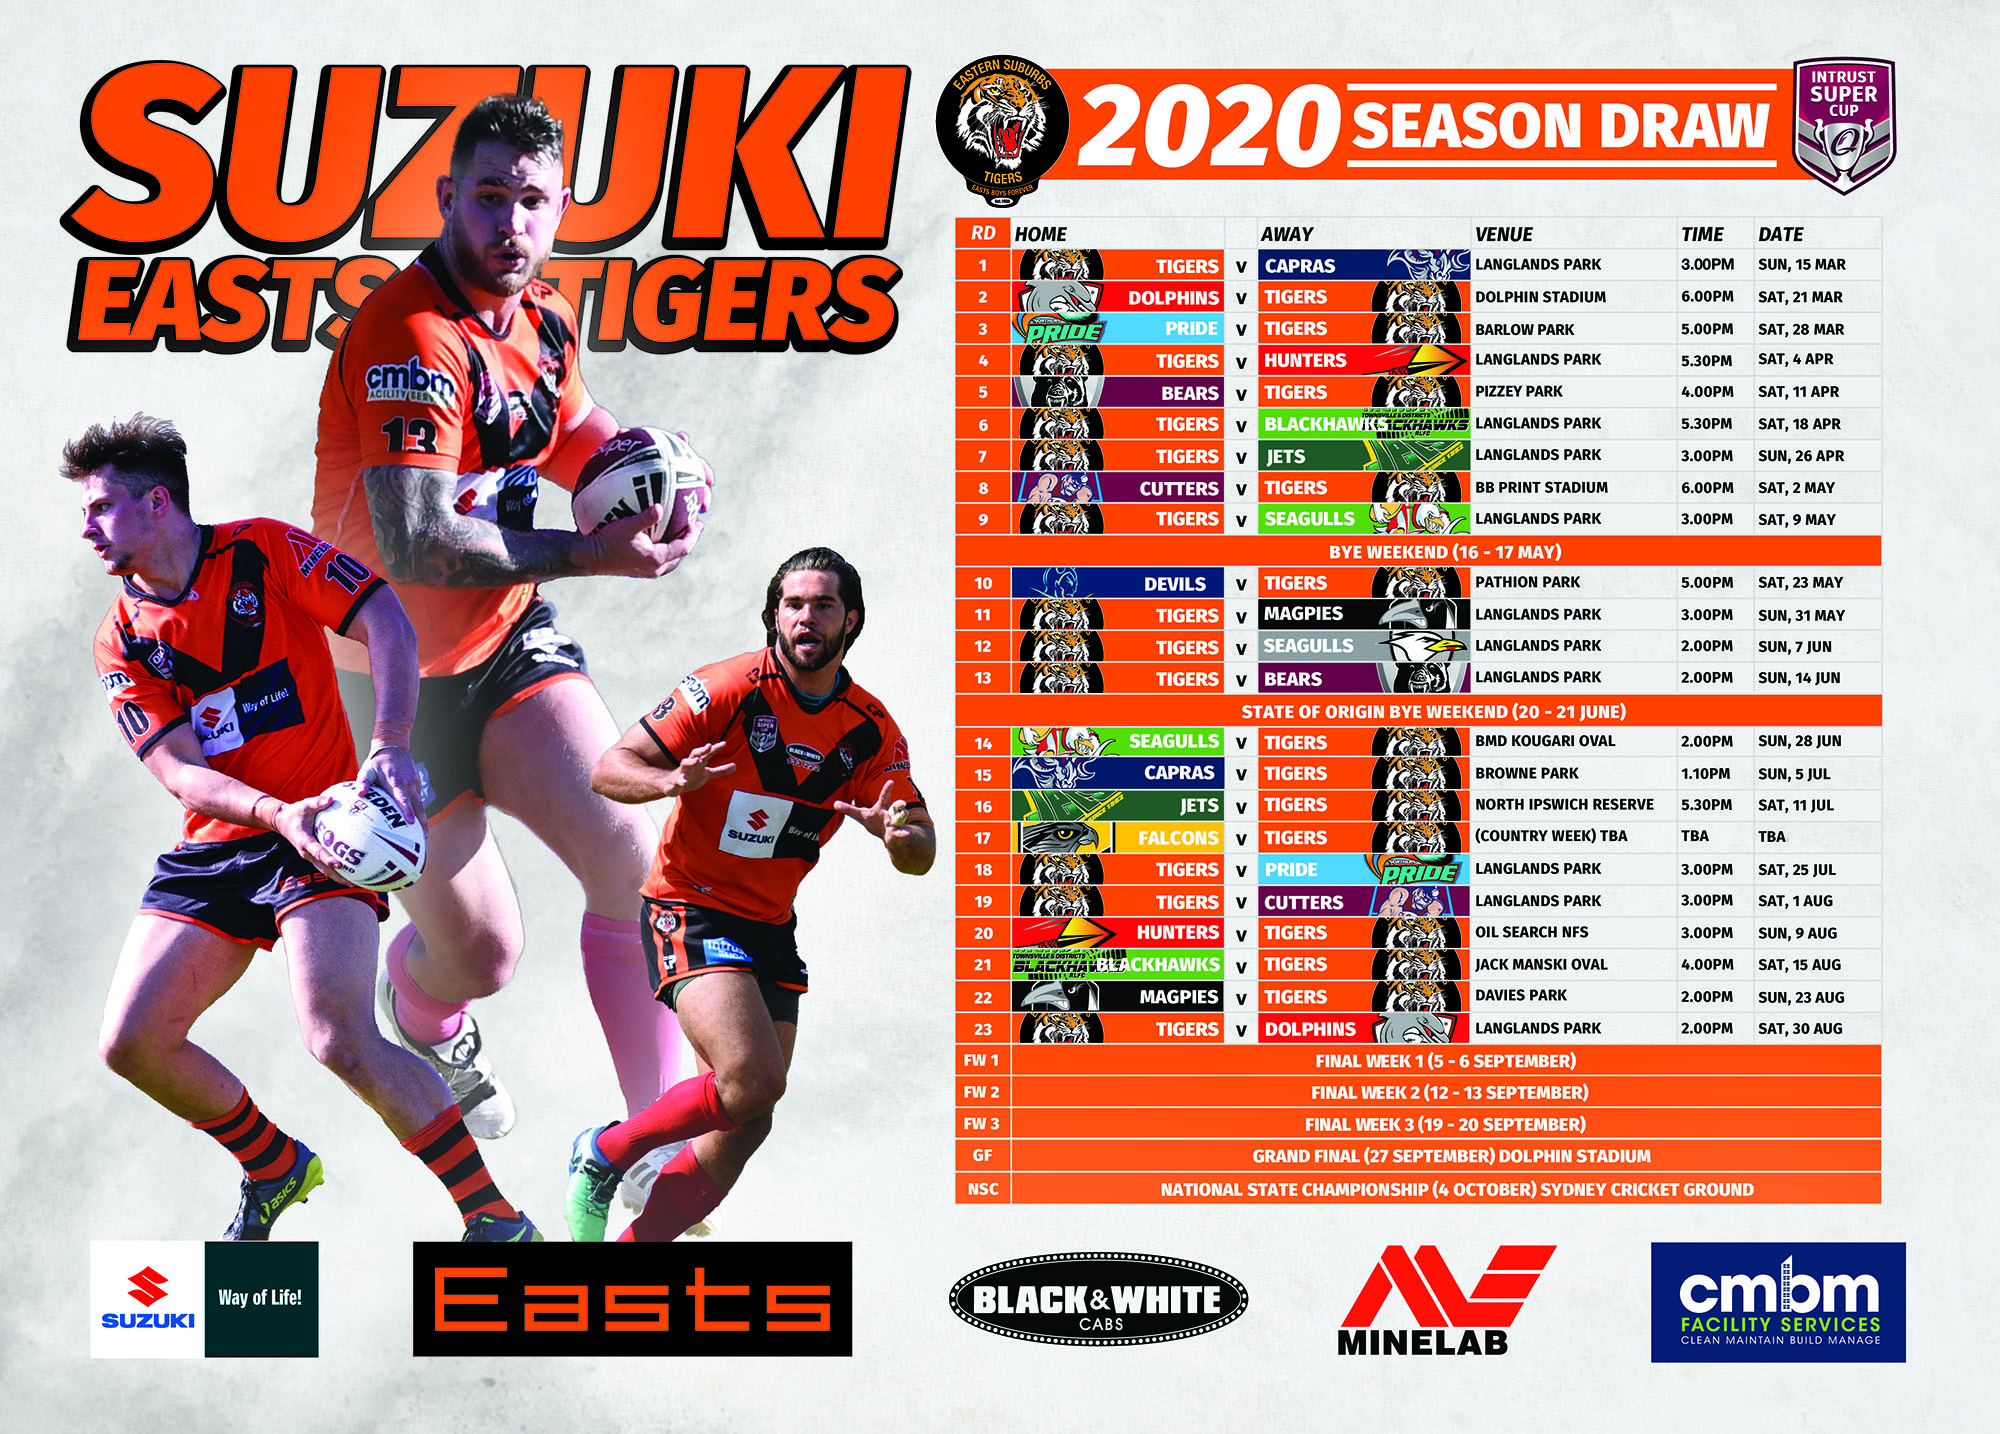 Easts Tigers Draw Poster 2020